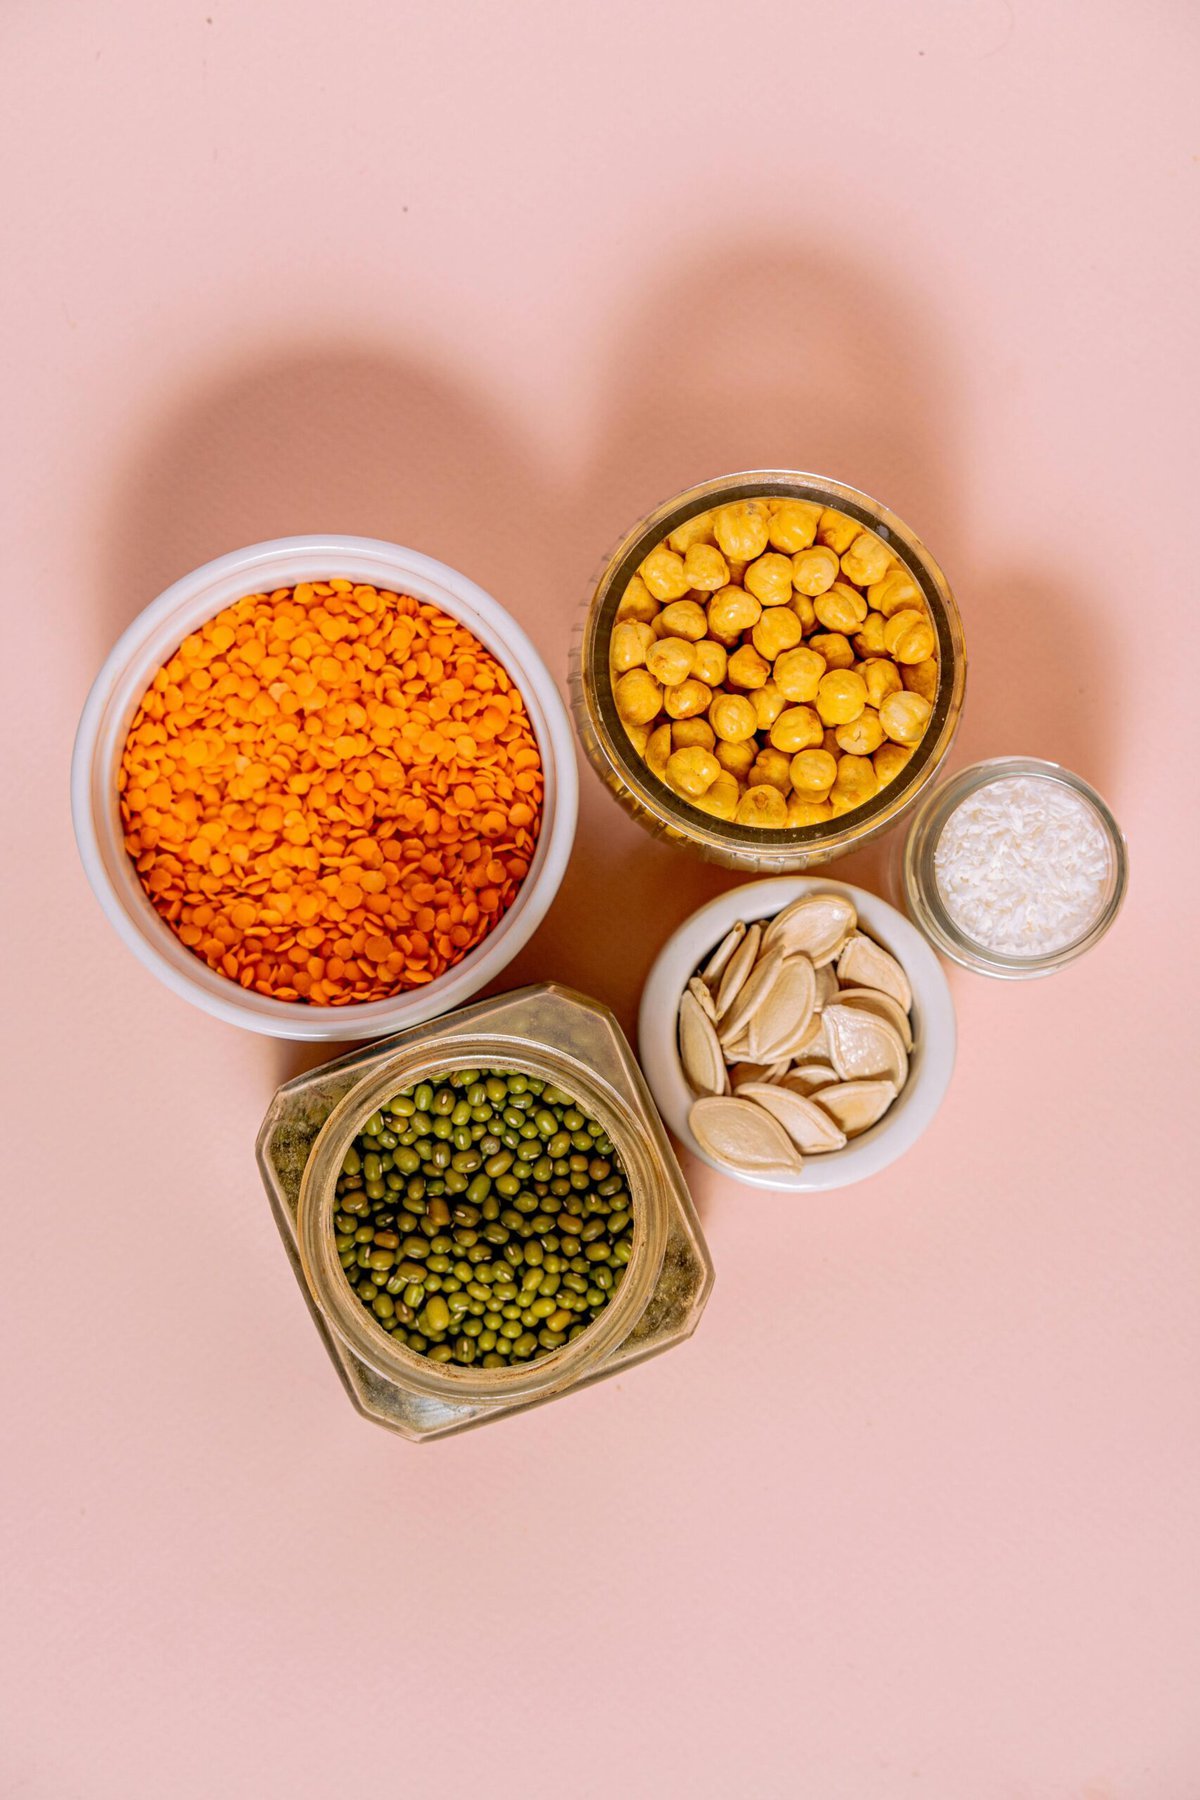 Bowl and jars of dry beans and legumes.